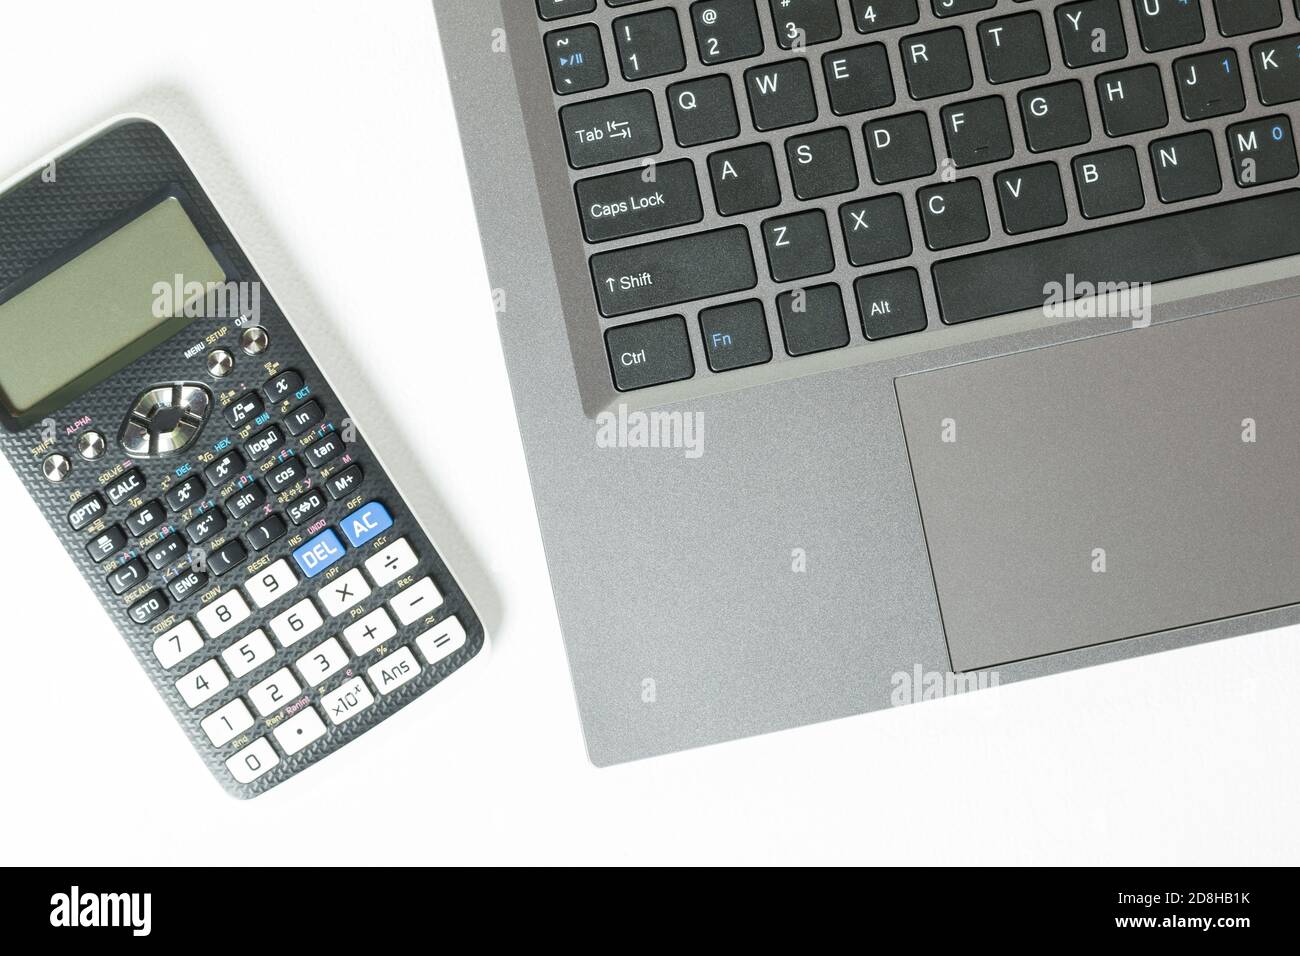 Top view of a laptop keyboard and calculator isolated on a white background. Stock Photo